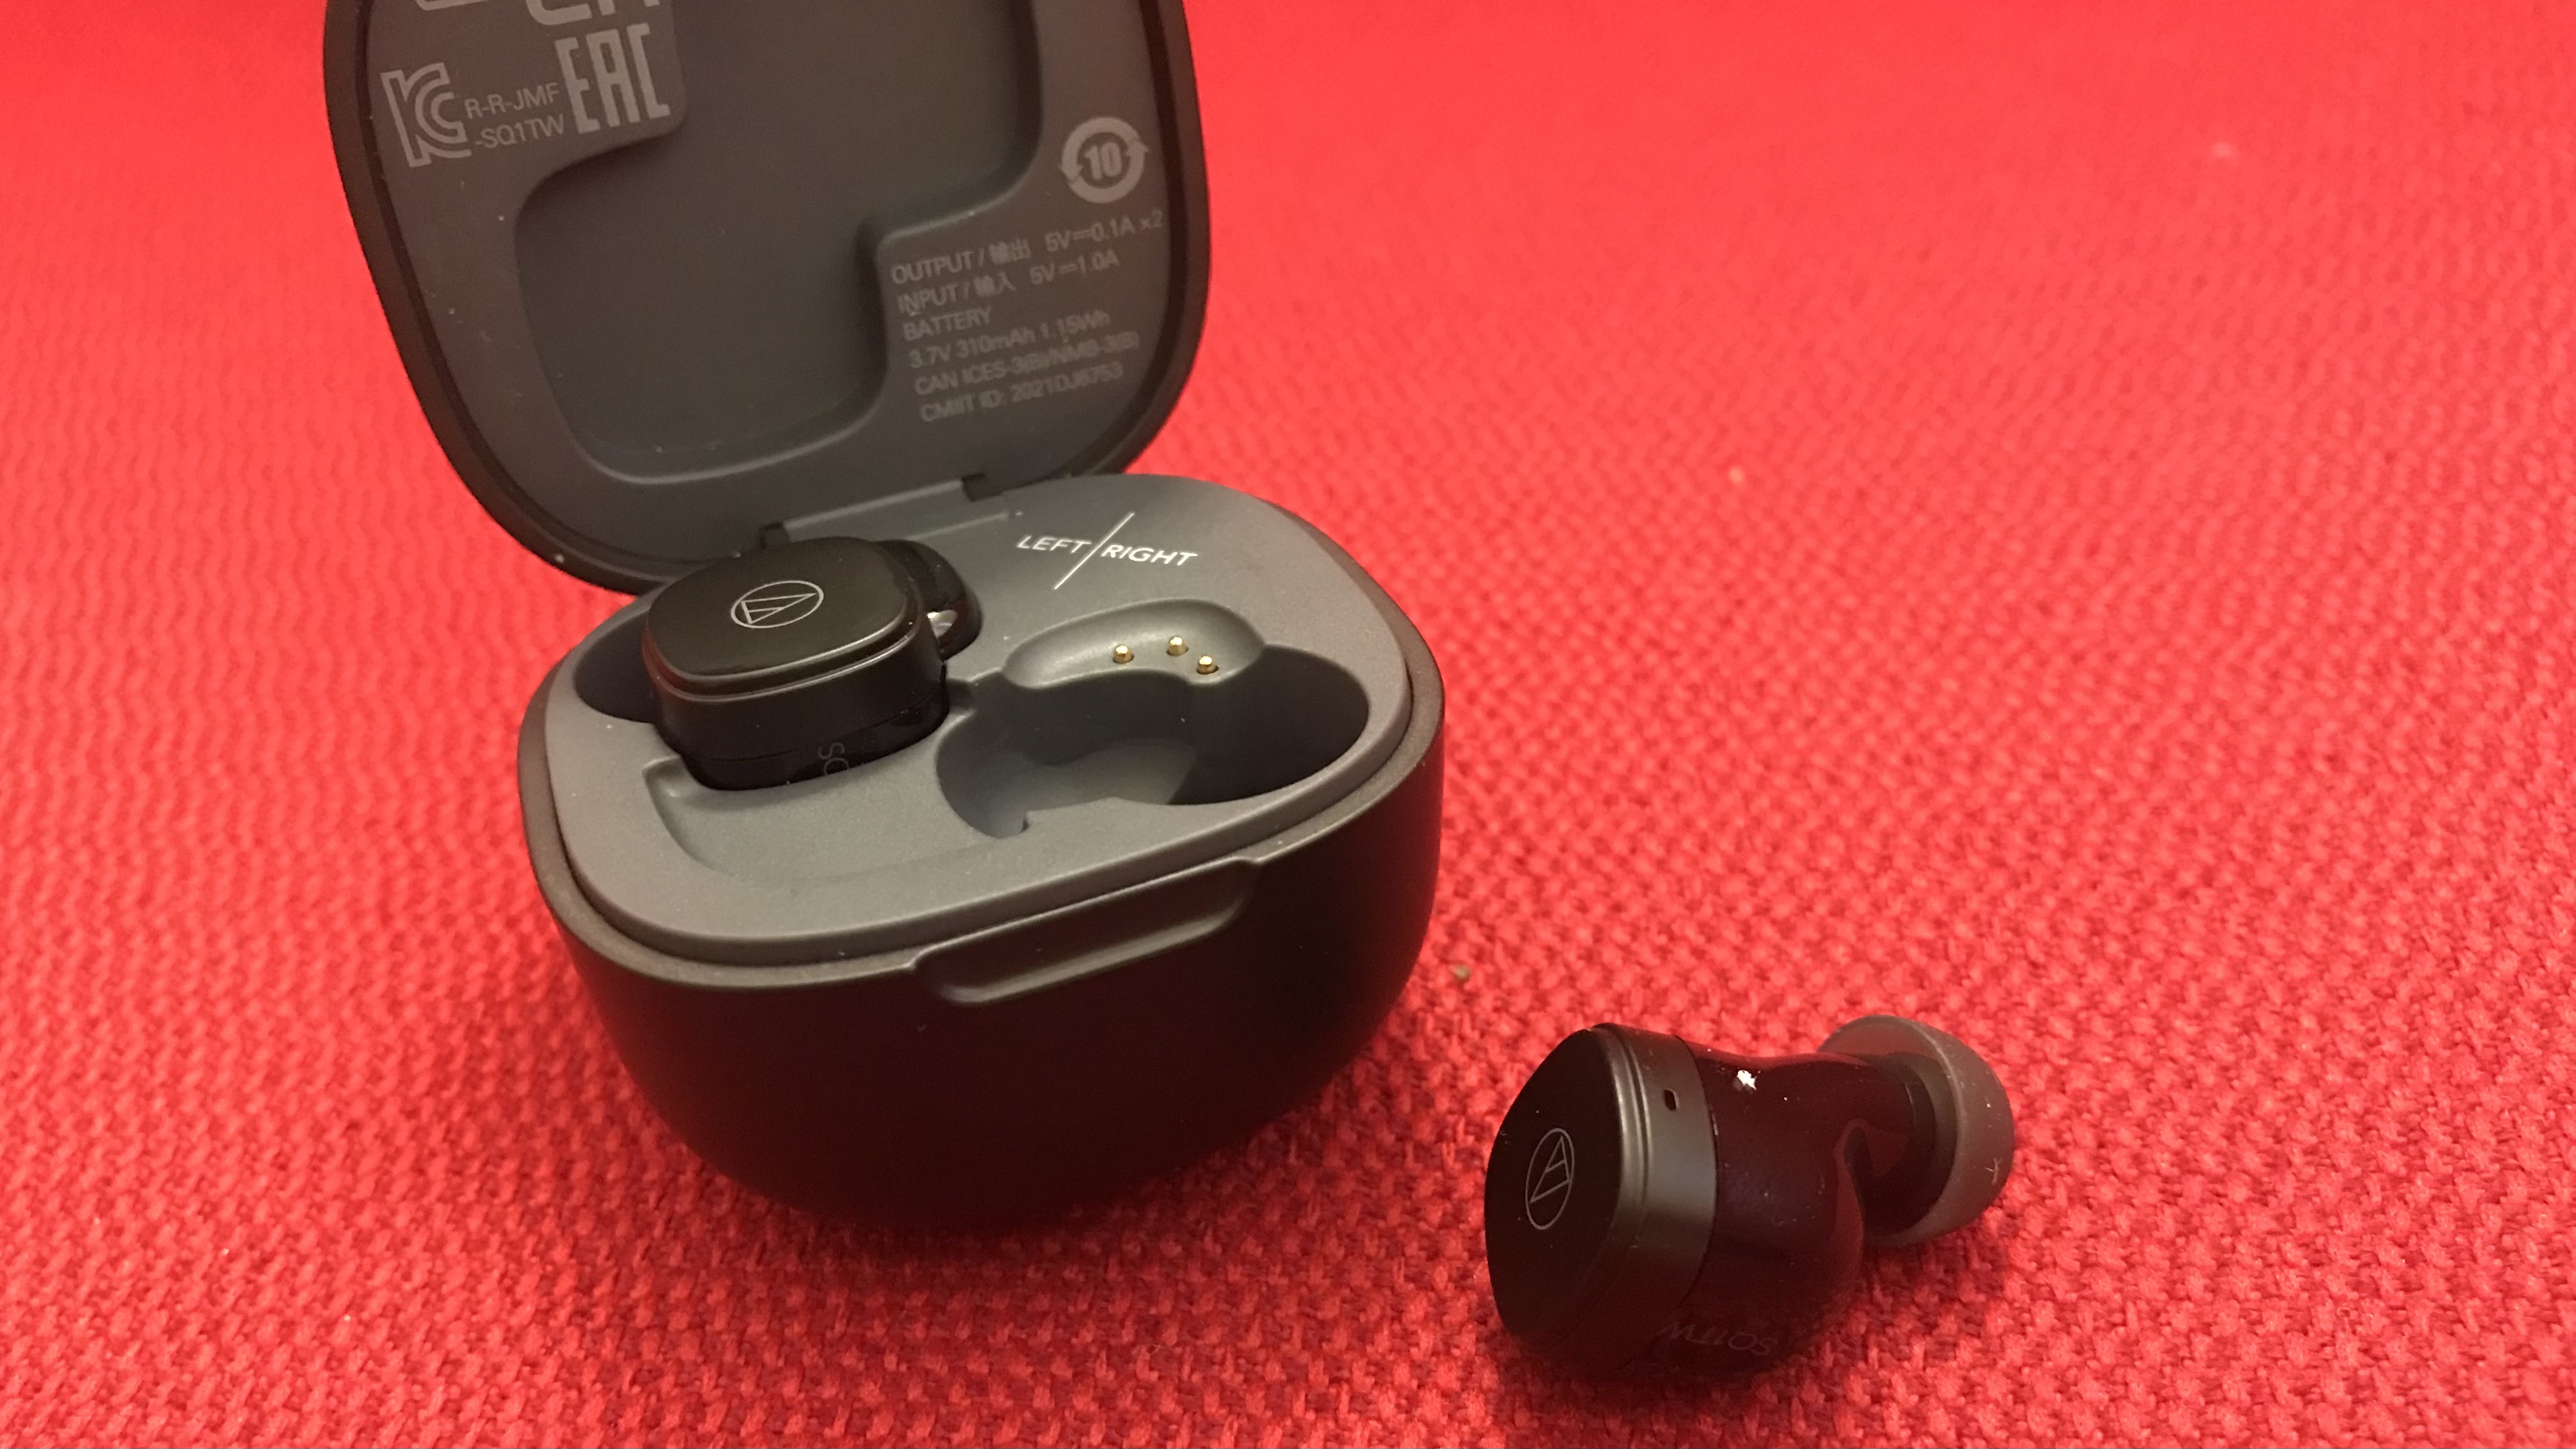 Audio-Technica ATH-SQ1TW earbuds out of case, on red background